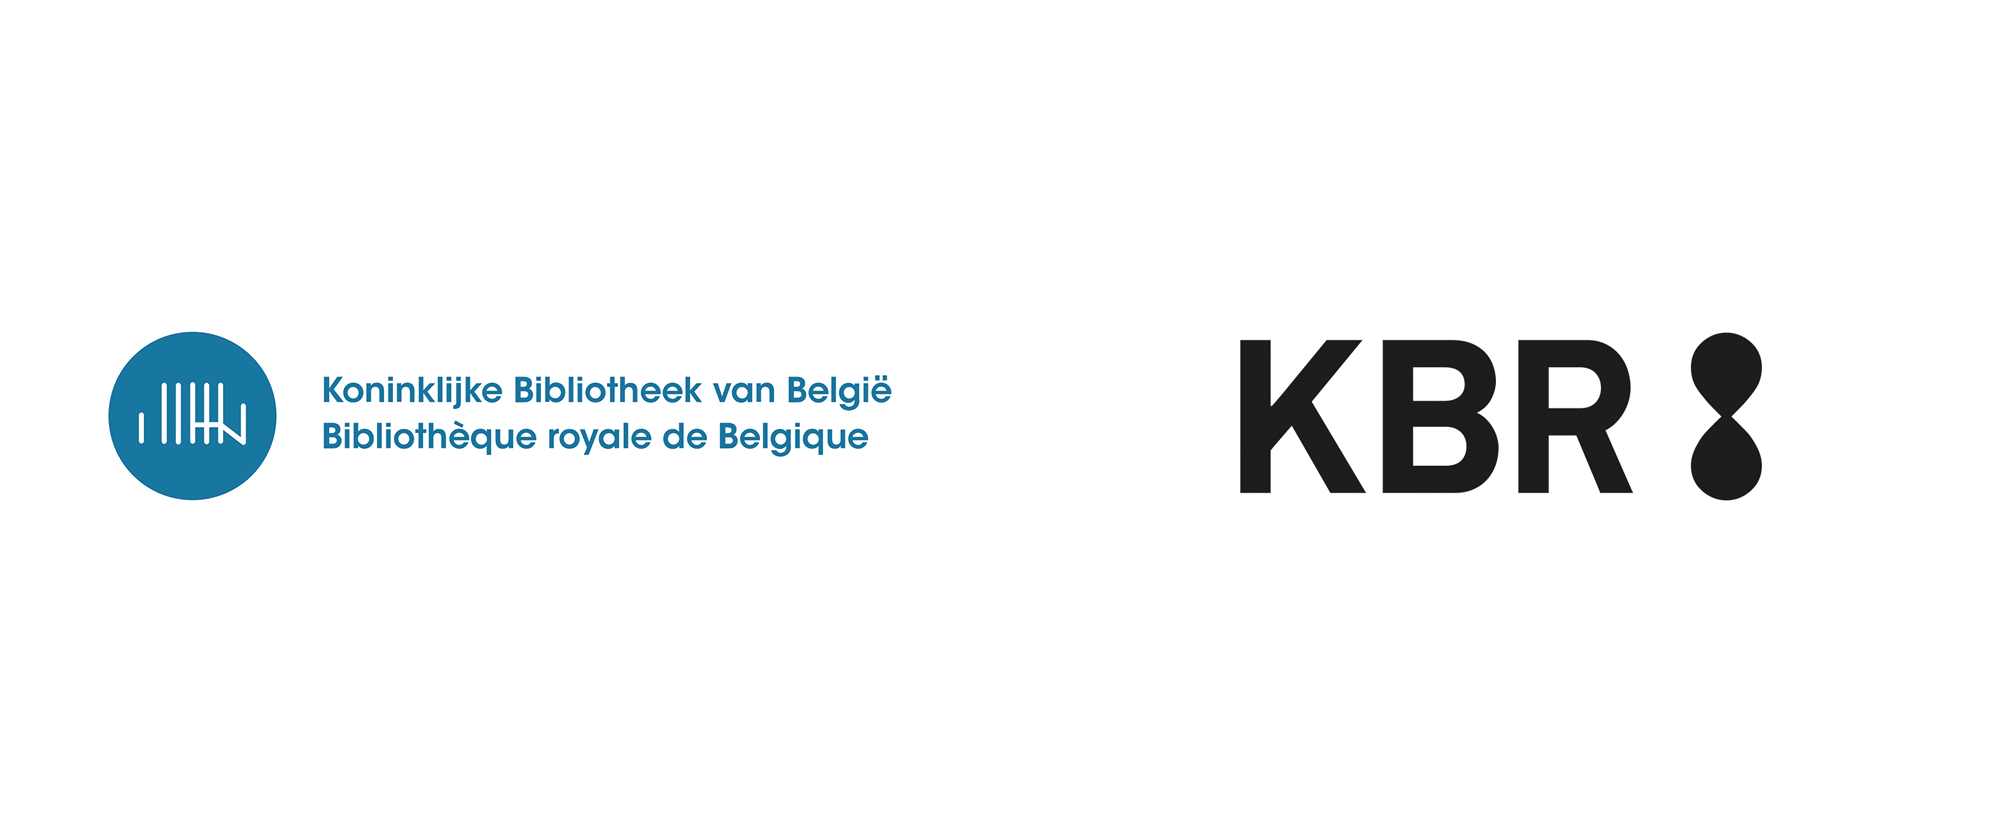 New Logo and Identity for KBR by Teamm, Dyncomm, and Oilinwater